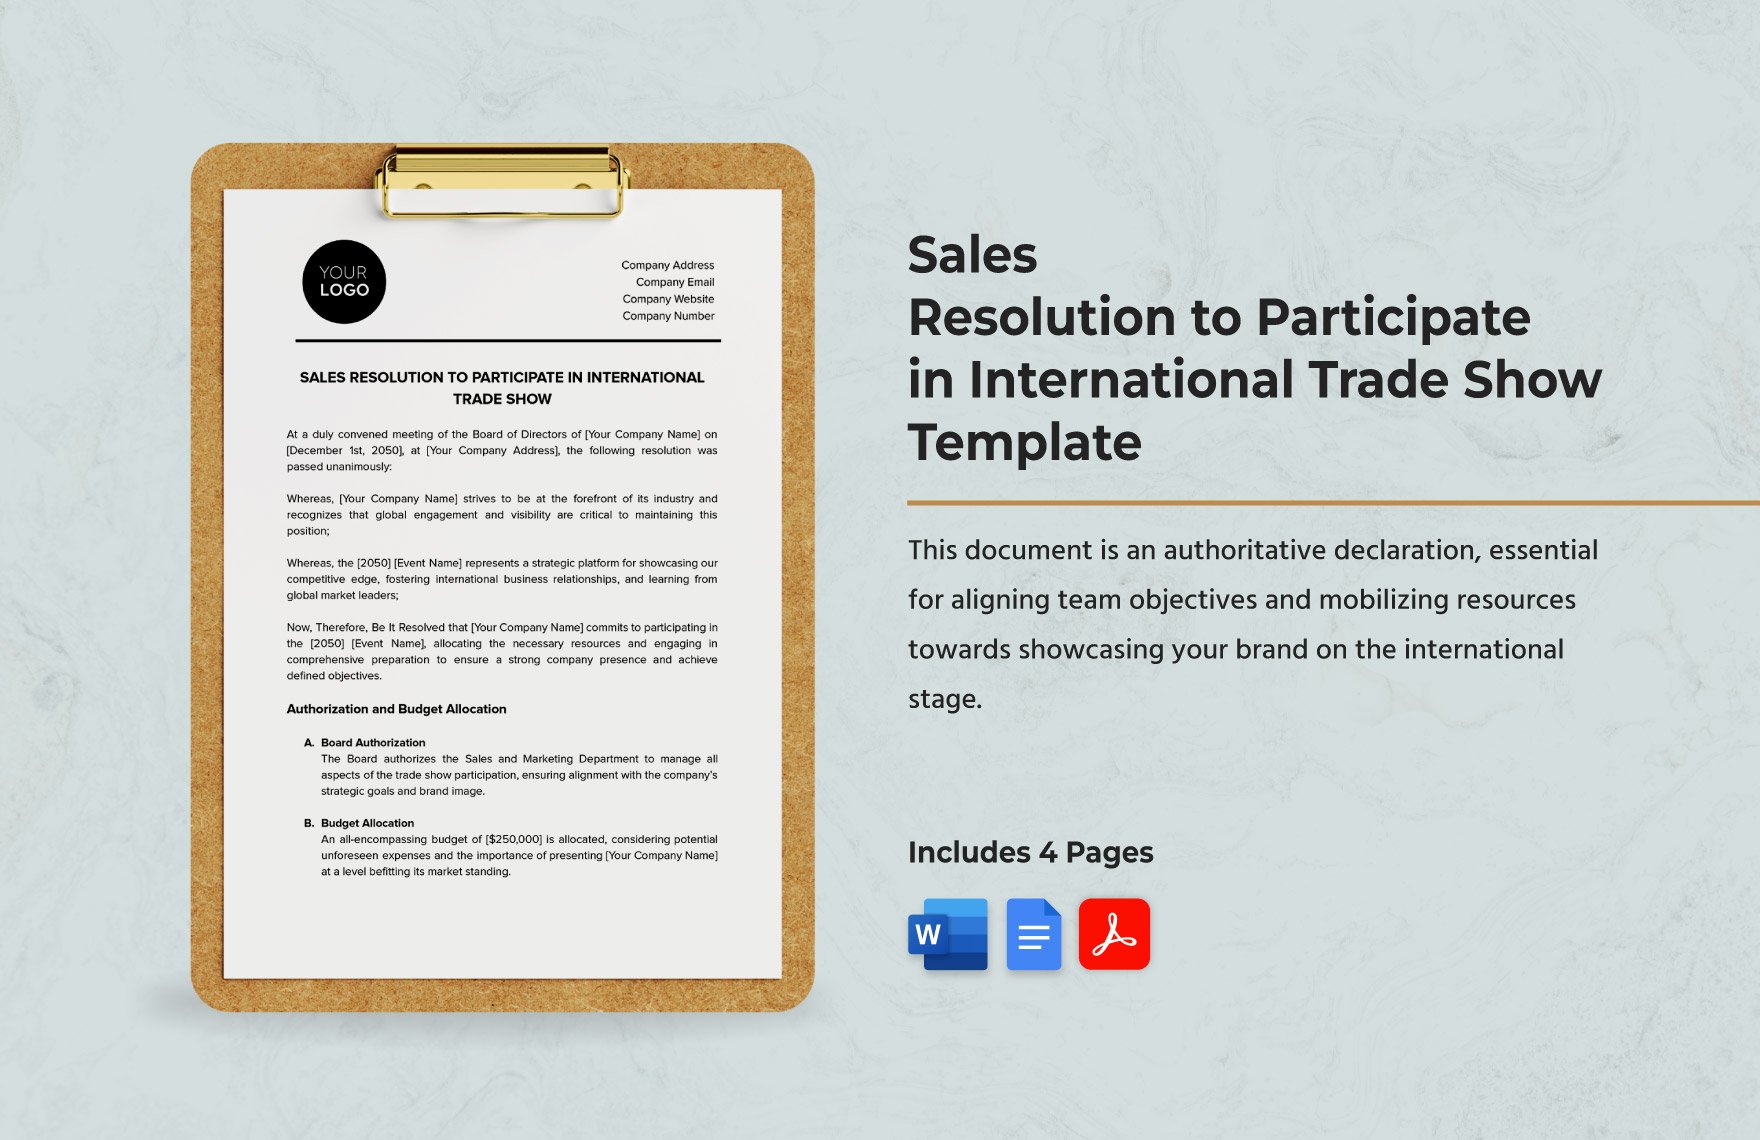 Sales Resolution to Participate in International Trade Show Template in